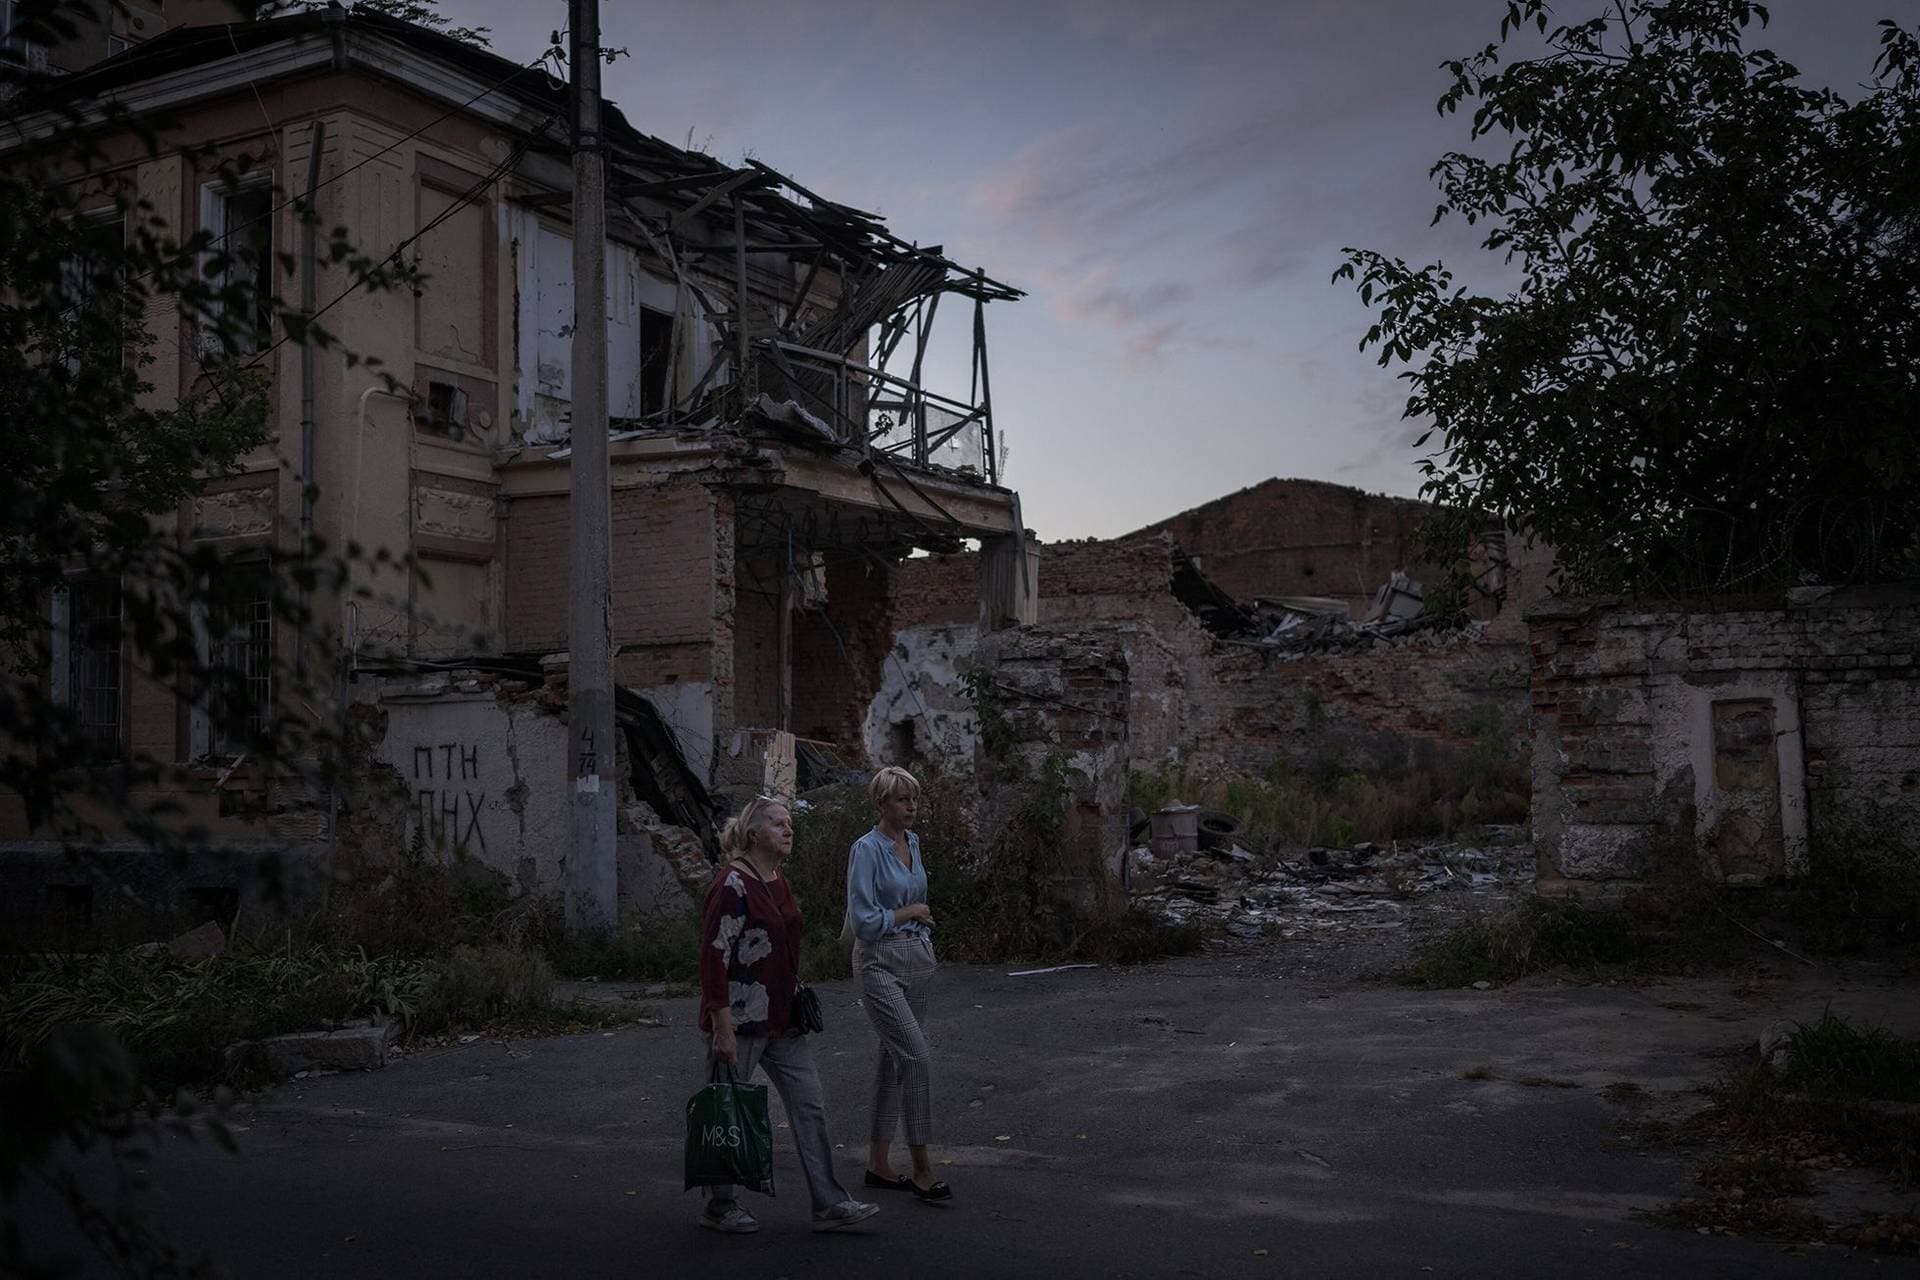 Residents of Stary Saltov walk past a destroyed house